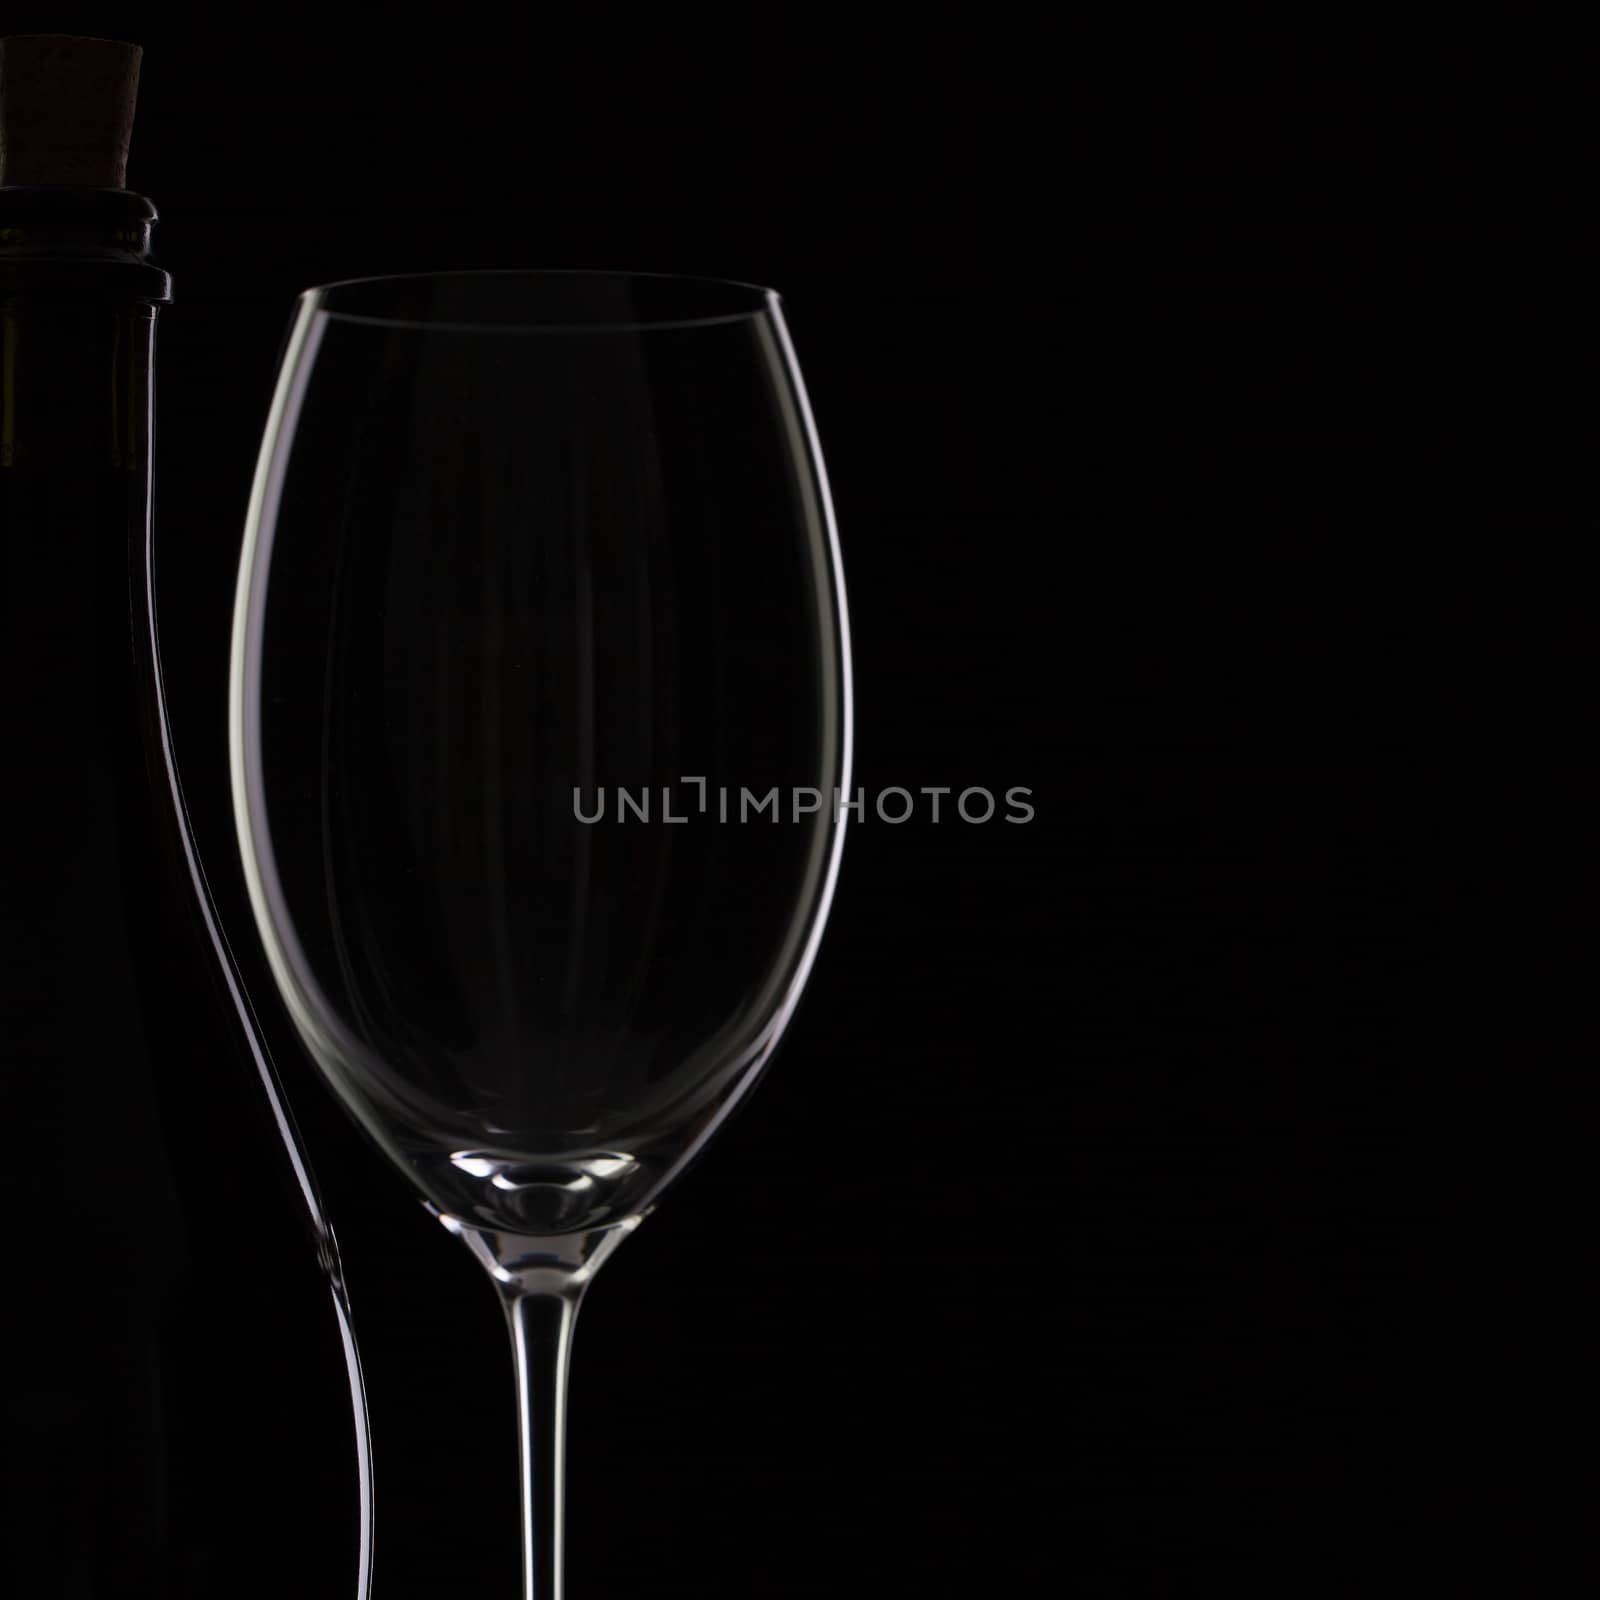 Bottle and glass on the black background by CaptureLight